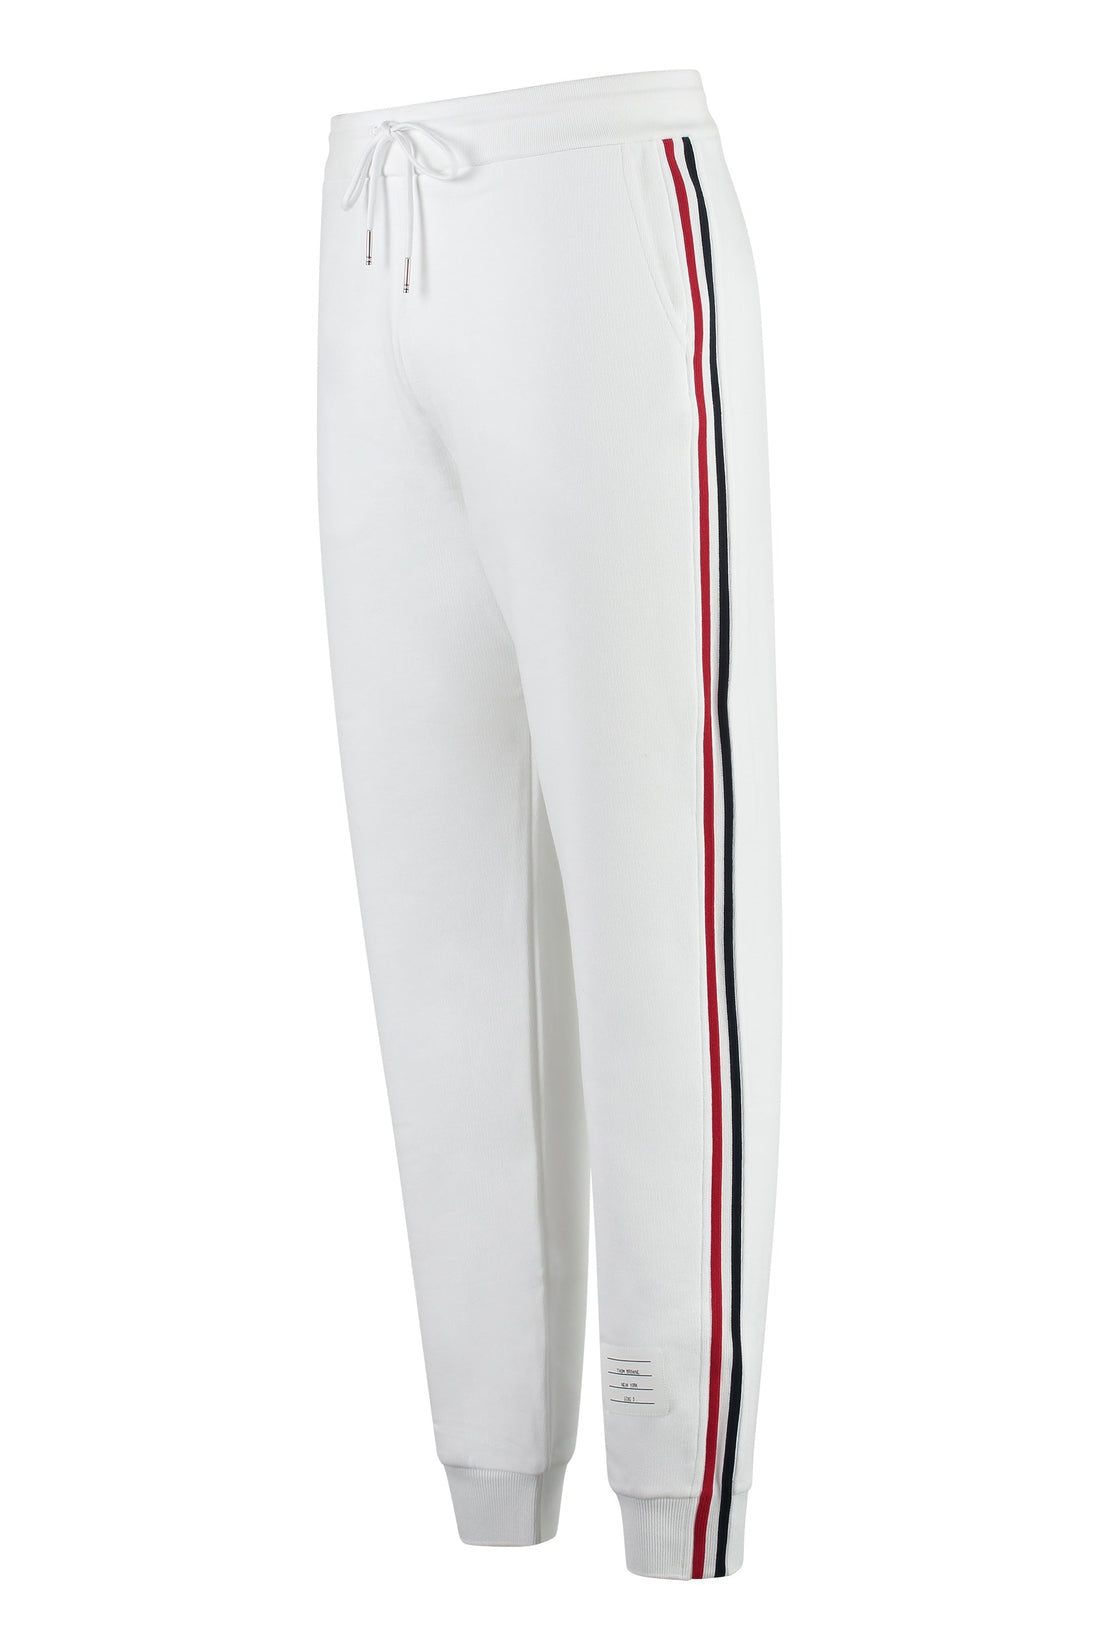 Thom Browne-OUTLET-SALE-Wool track-pants with knitted side stripes-ARCHIVIST